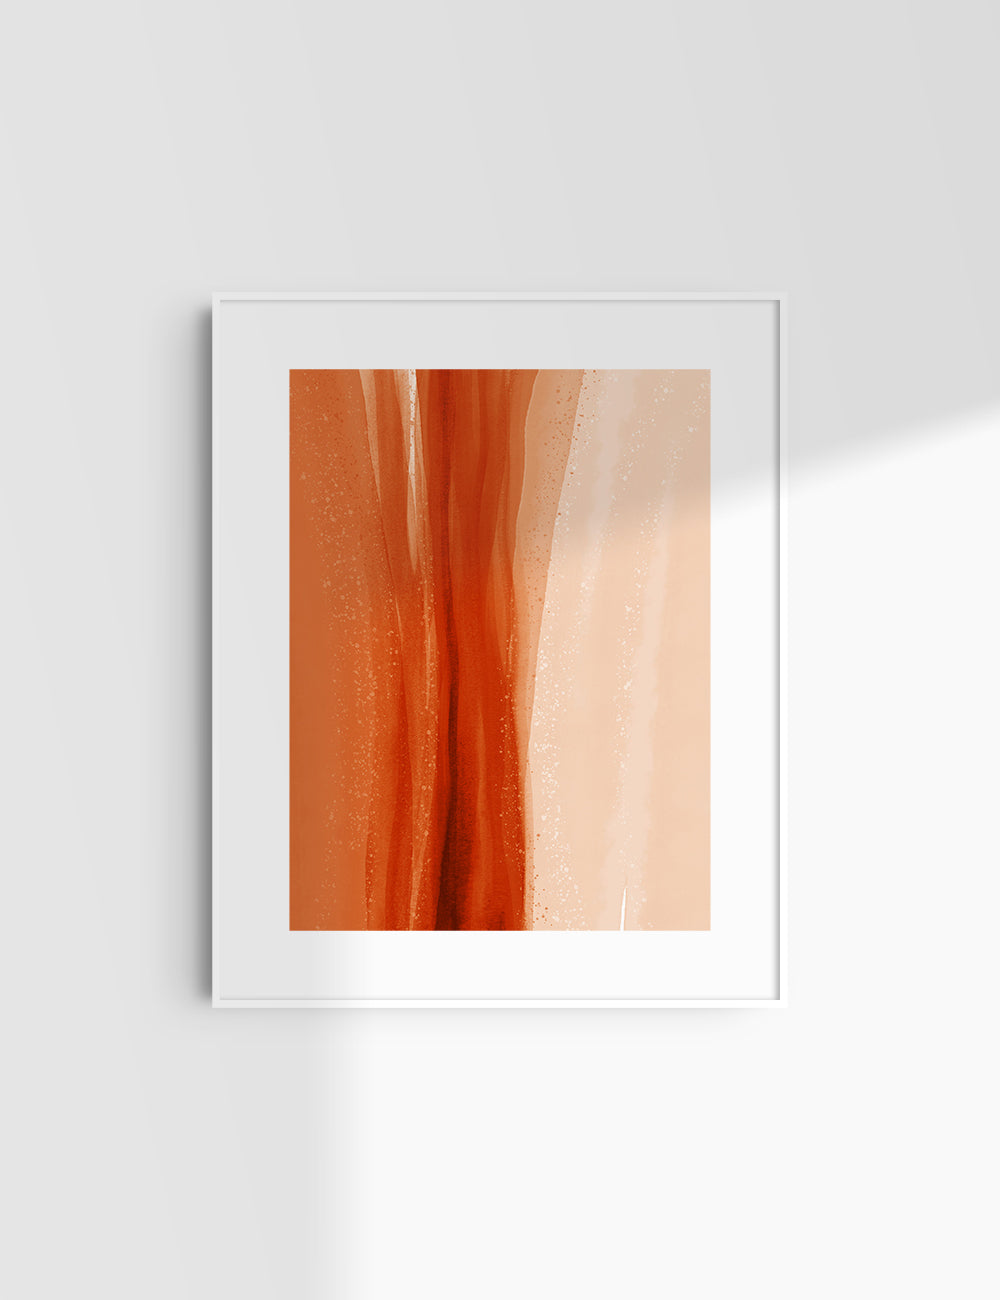 WATERCOLOR ABSTRACT. Burnt Orange Aesthetic. Abstract Watercolor Painting. Printable Wall Art. - PAPER MOON Art & Design